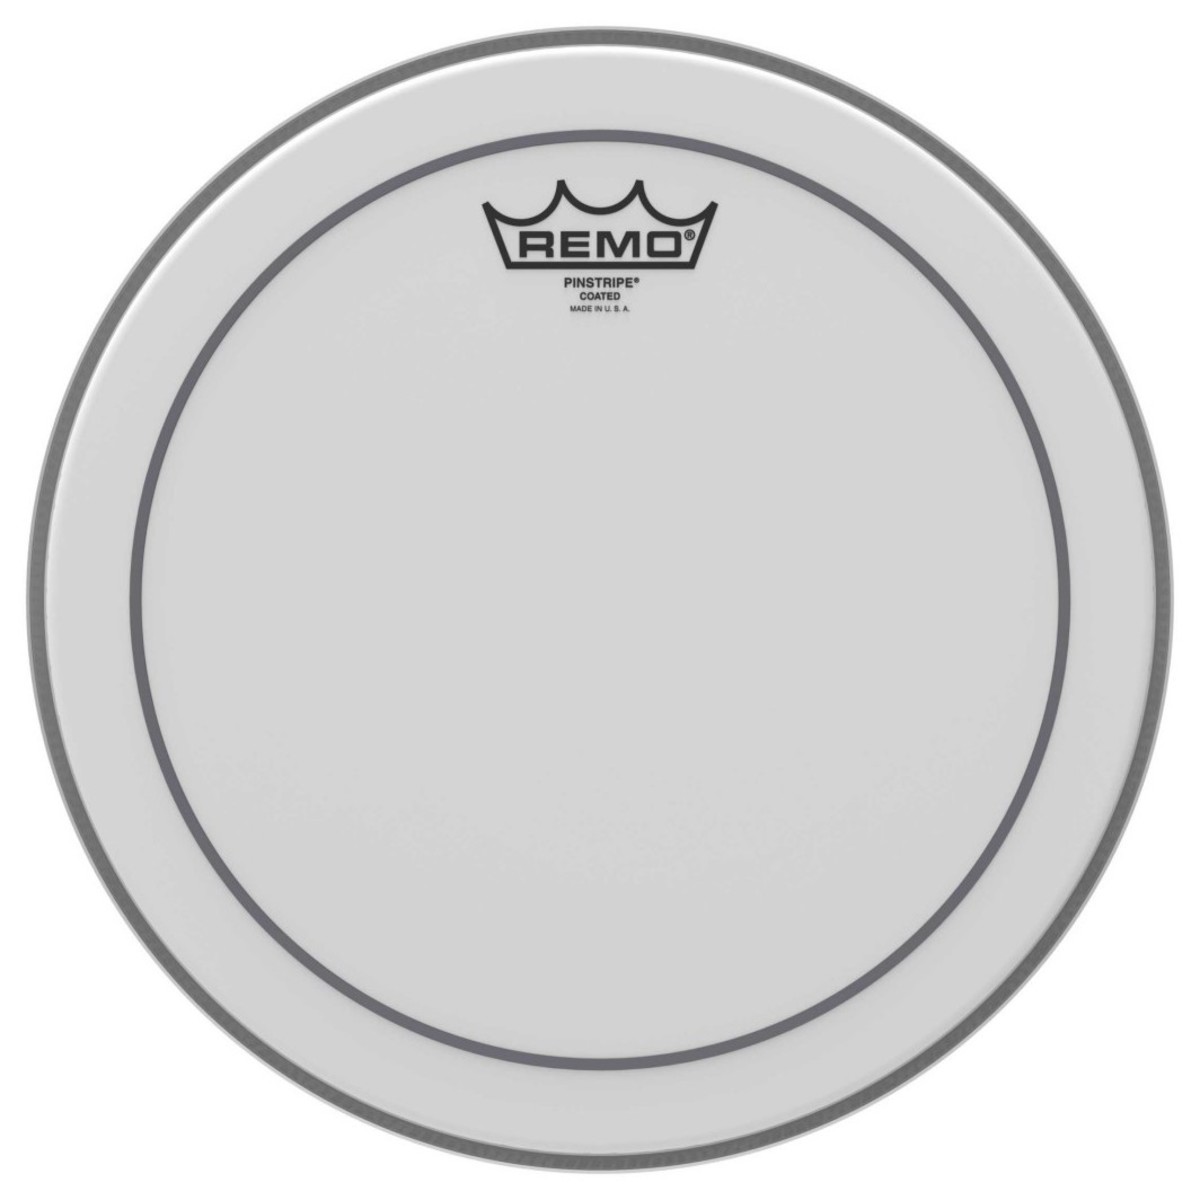 An image of Remo Pinstripe 12" Coated Drumhead | PMT Online